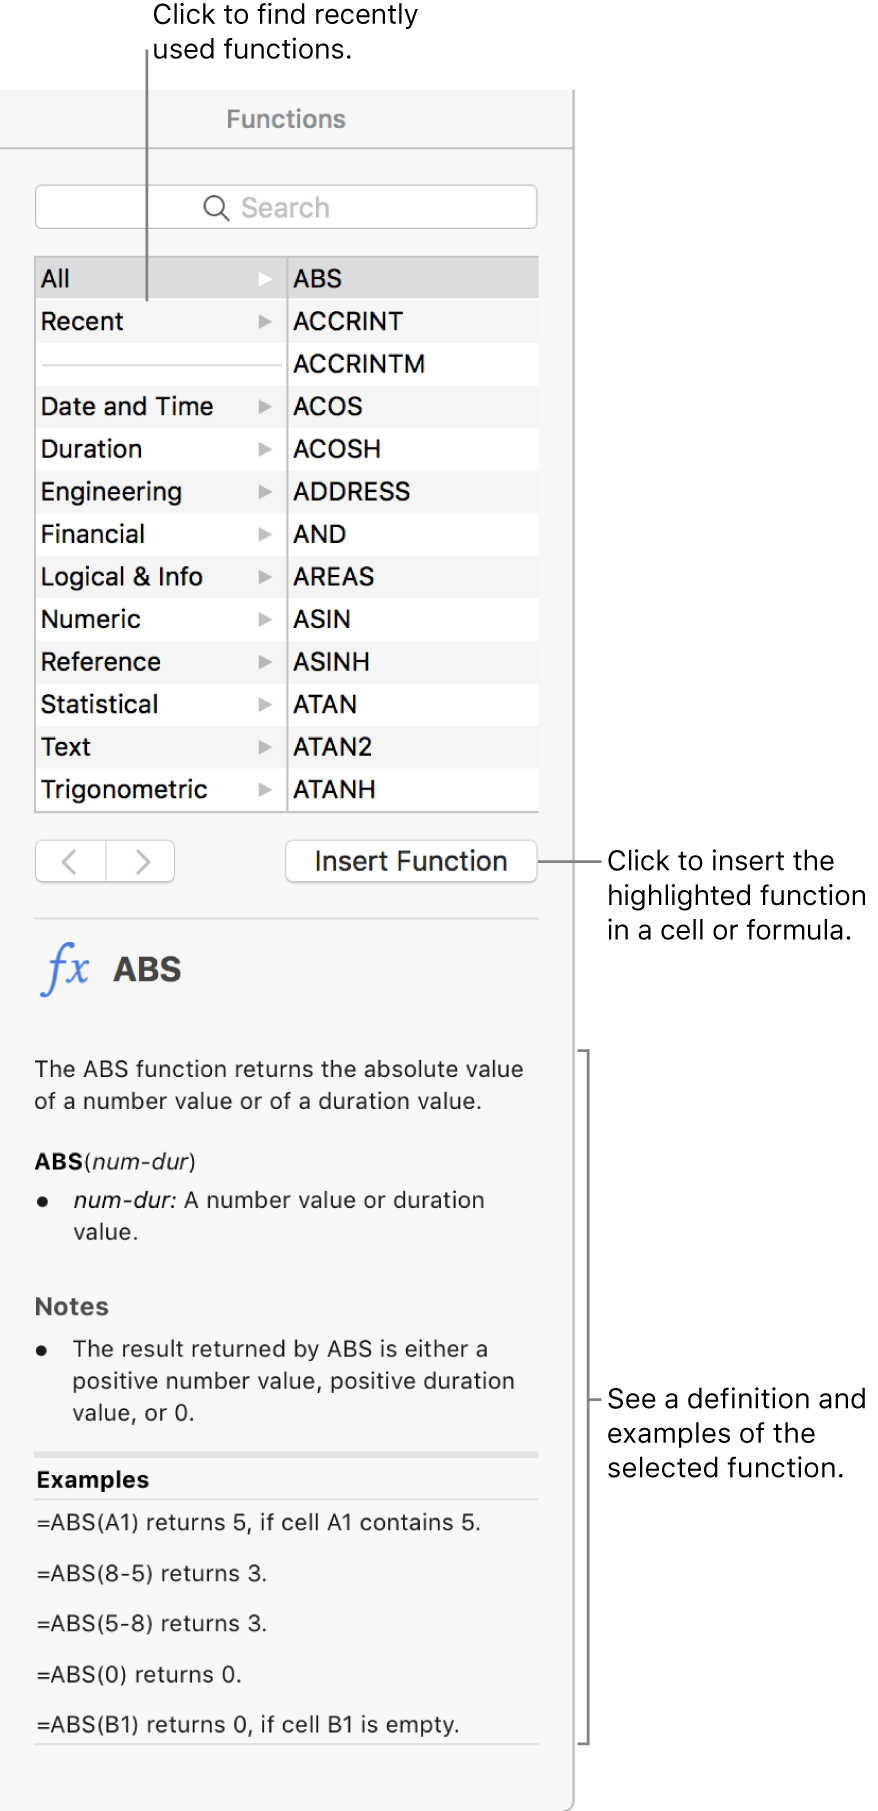 The Function Browser with a call out to recently used functions, the Insert Function button and the function definition.